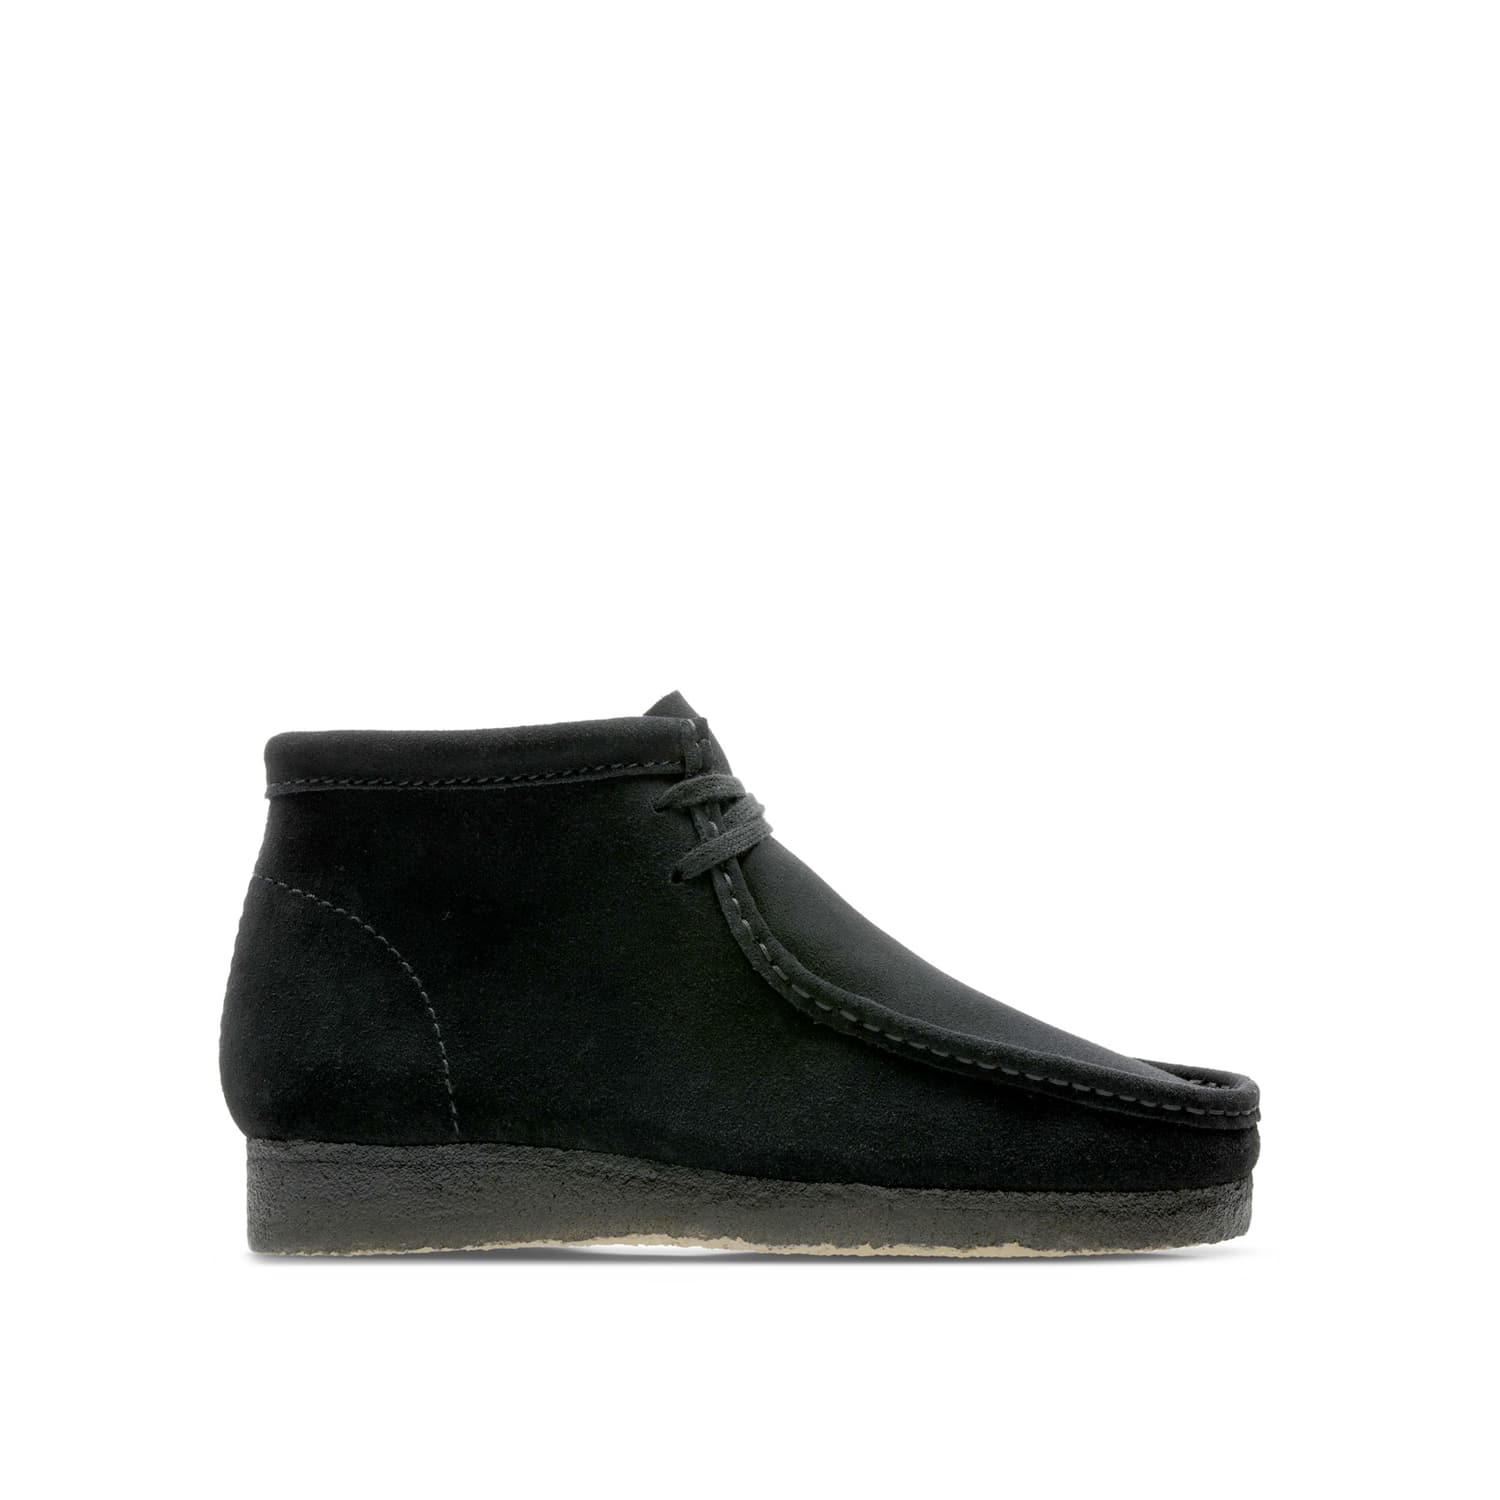 Clarks Wallabee Boots Supreme: Western Cut Out Black